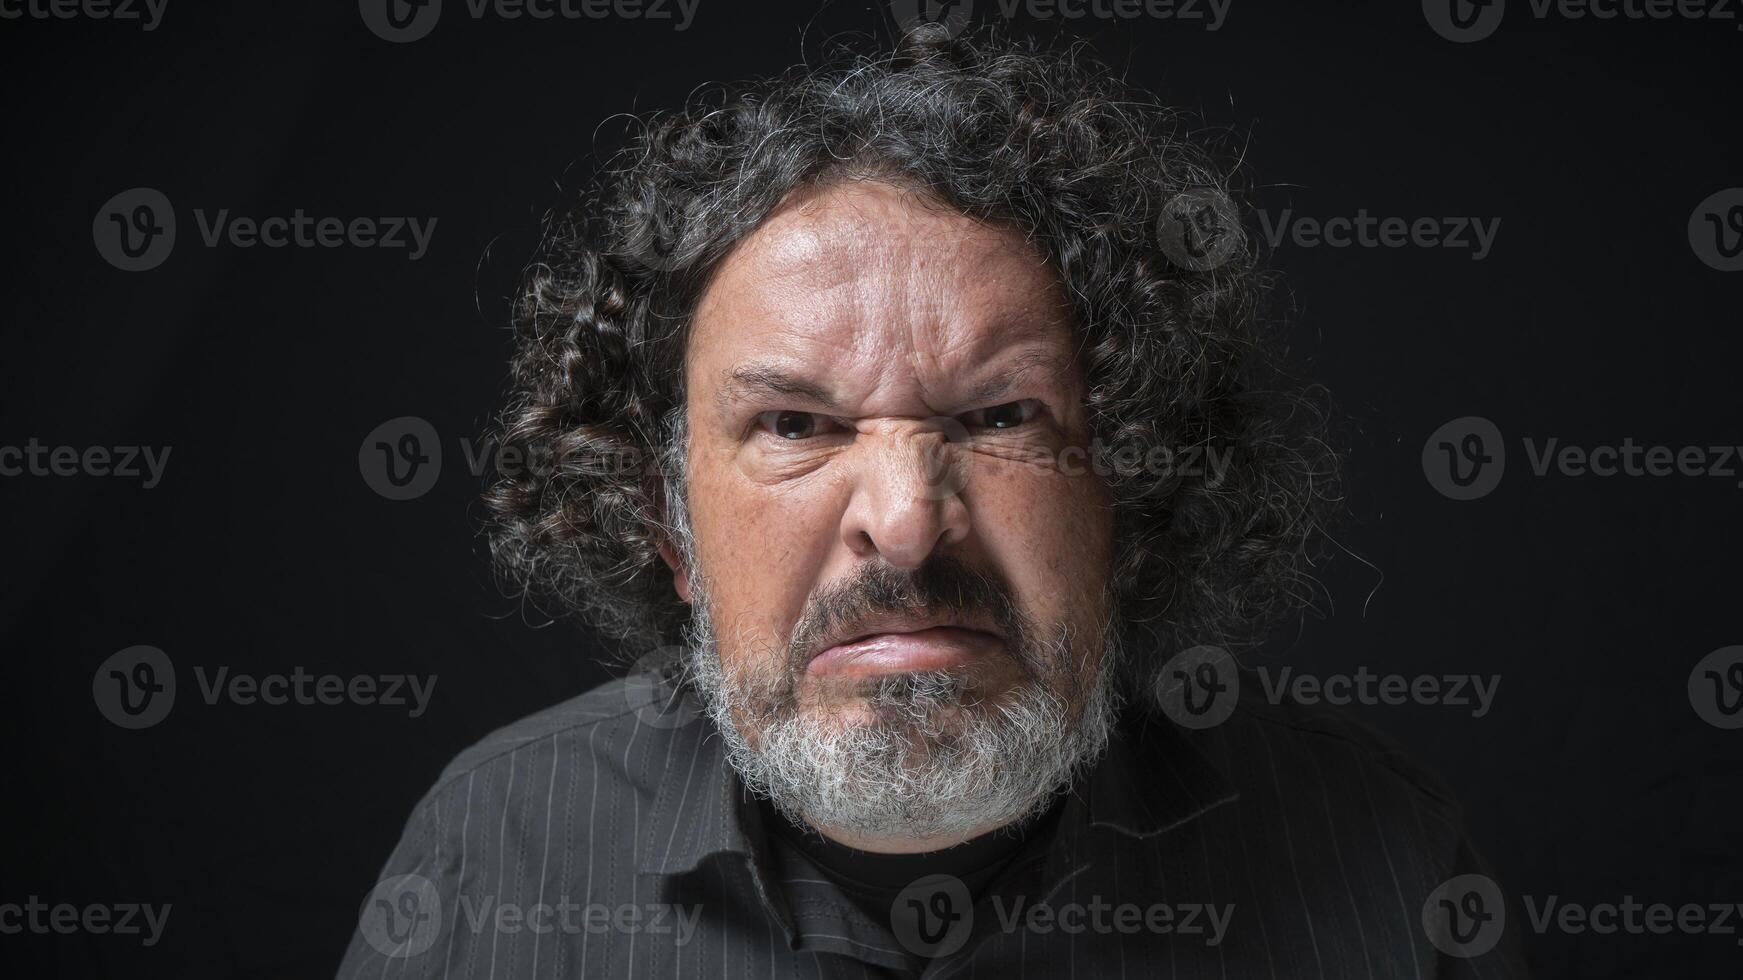 Man with white beard and black curly hair with angry expression, looking straight at camera, wearing black shirt against black background photo